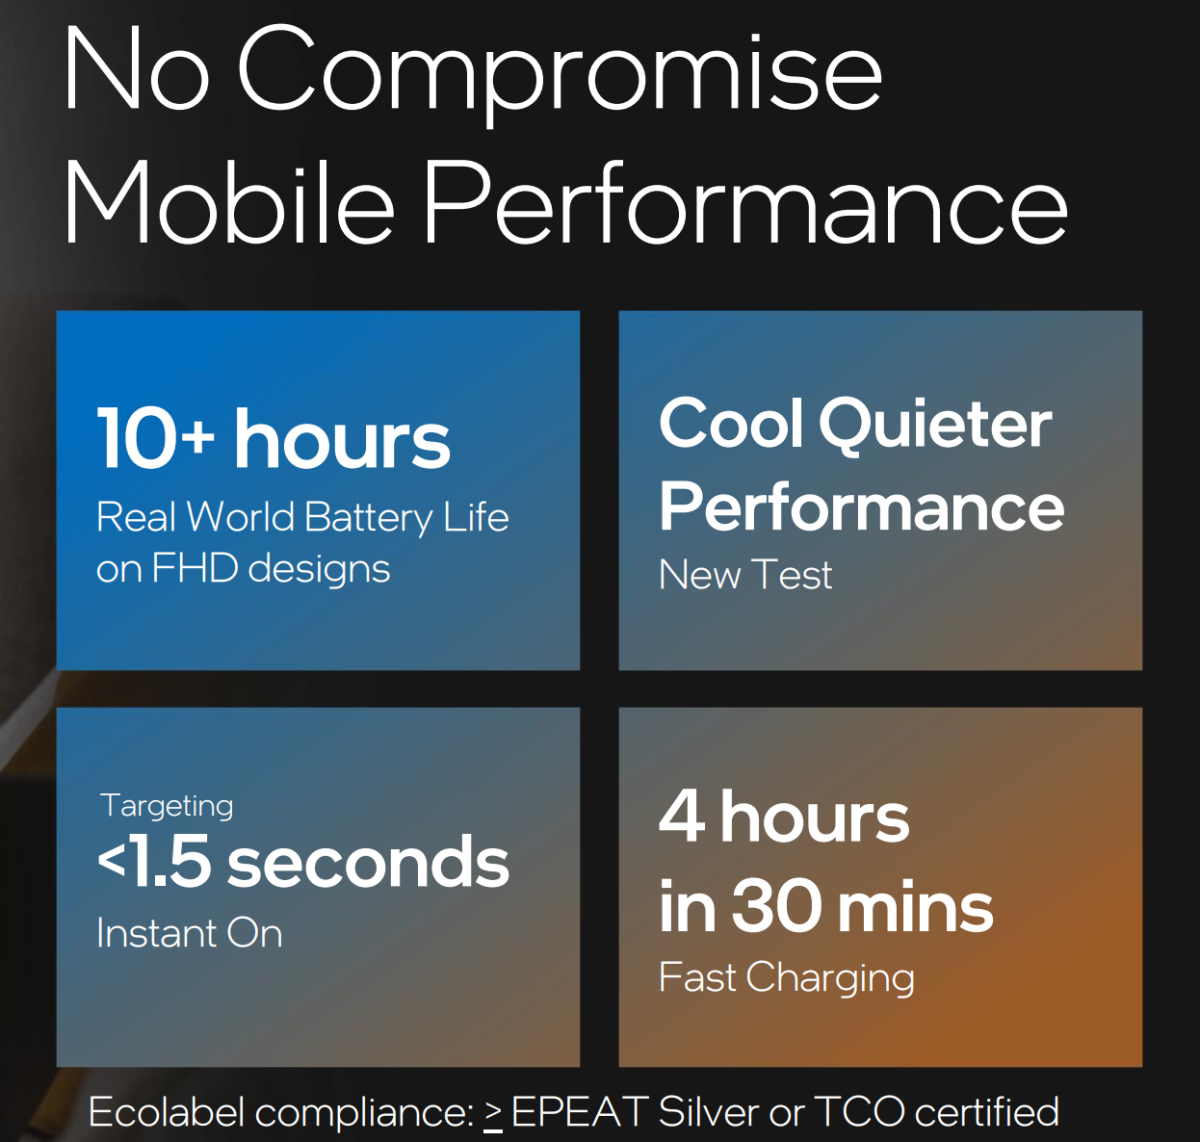 Microsoft's Interpretation Of “No Compromise” Is The Definition Of “ Compromise”